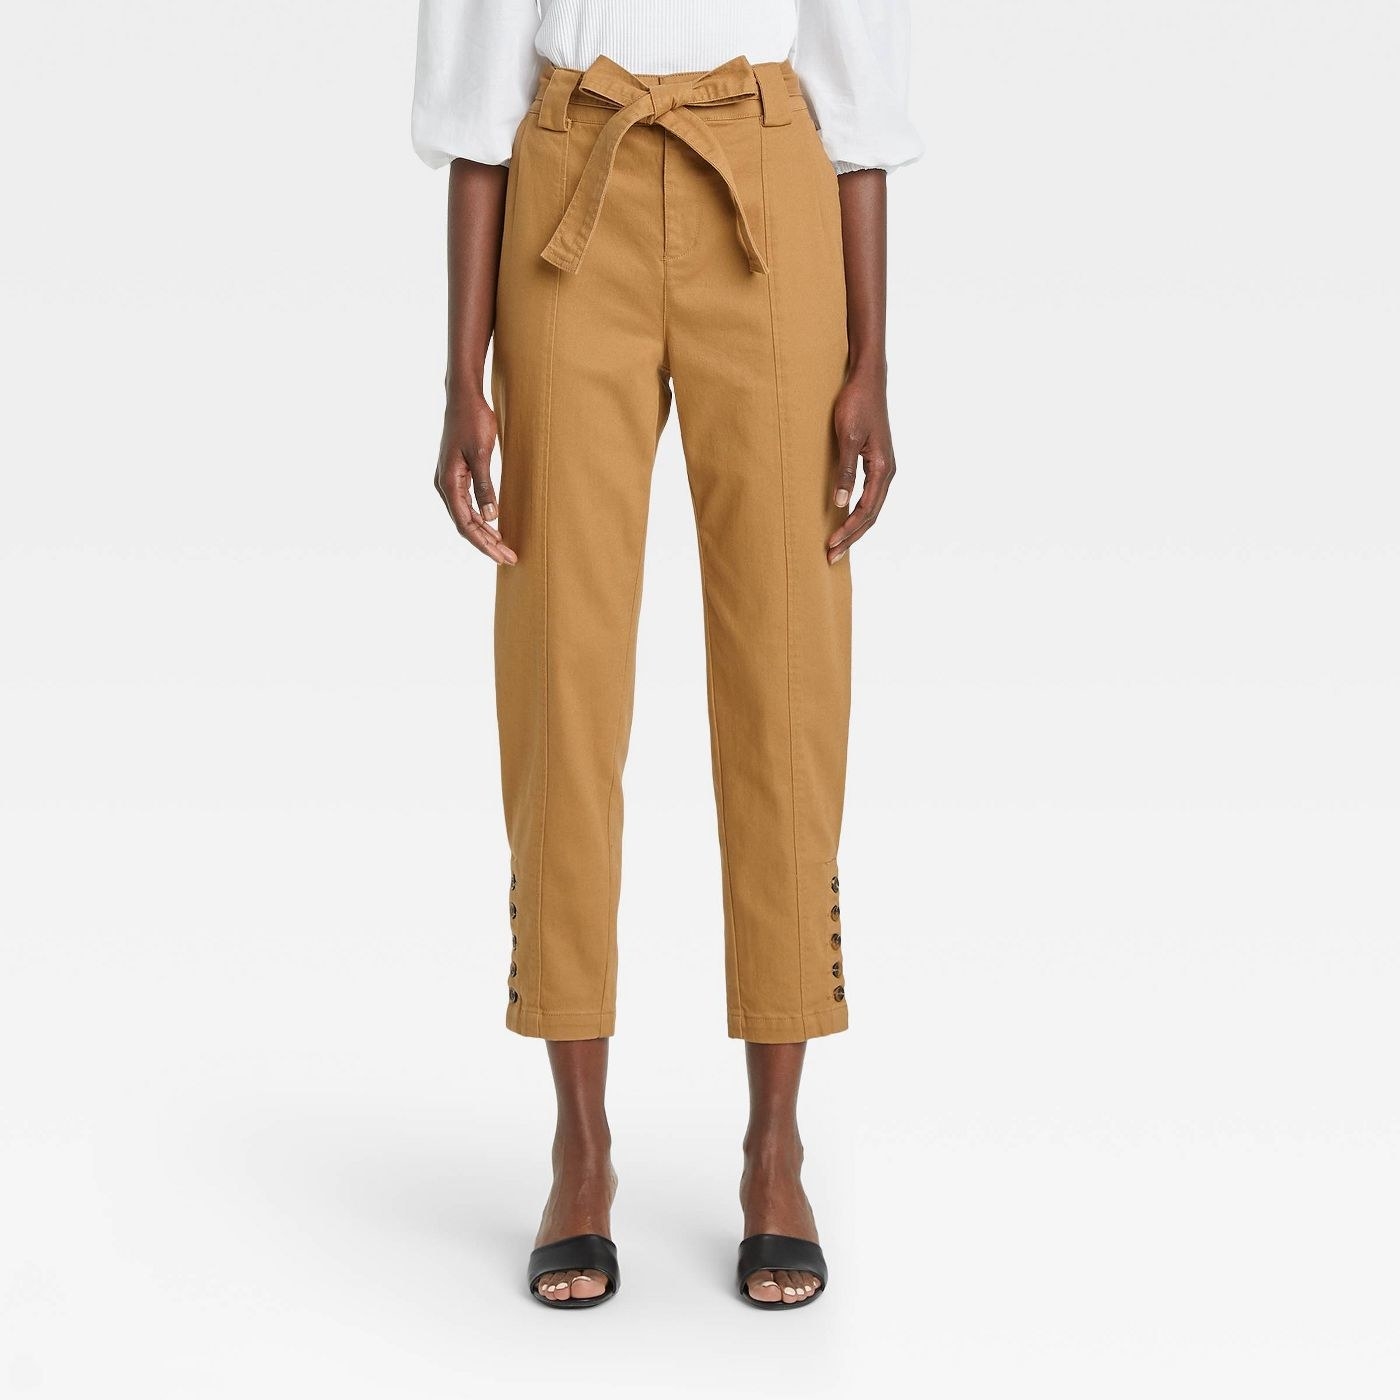 Model wearing the brown pair of button hem ankle-length pants